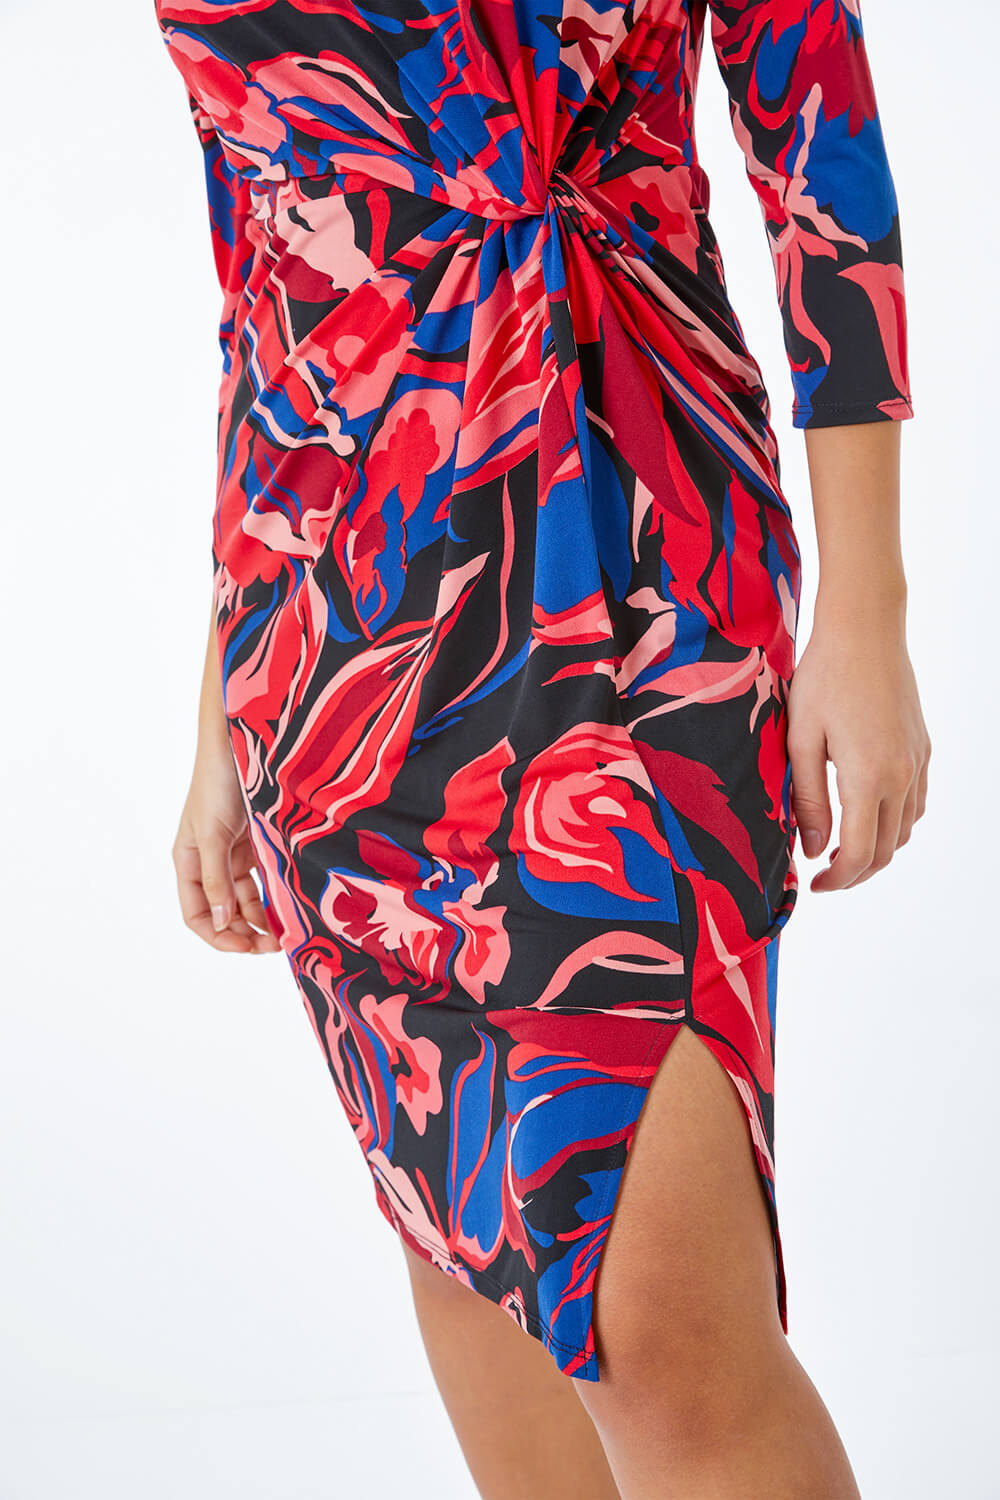 CORAL Petite Abstract Floral Side Knot Dress, Image 5 of 5